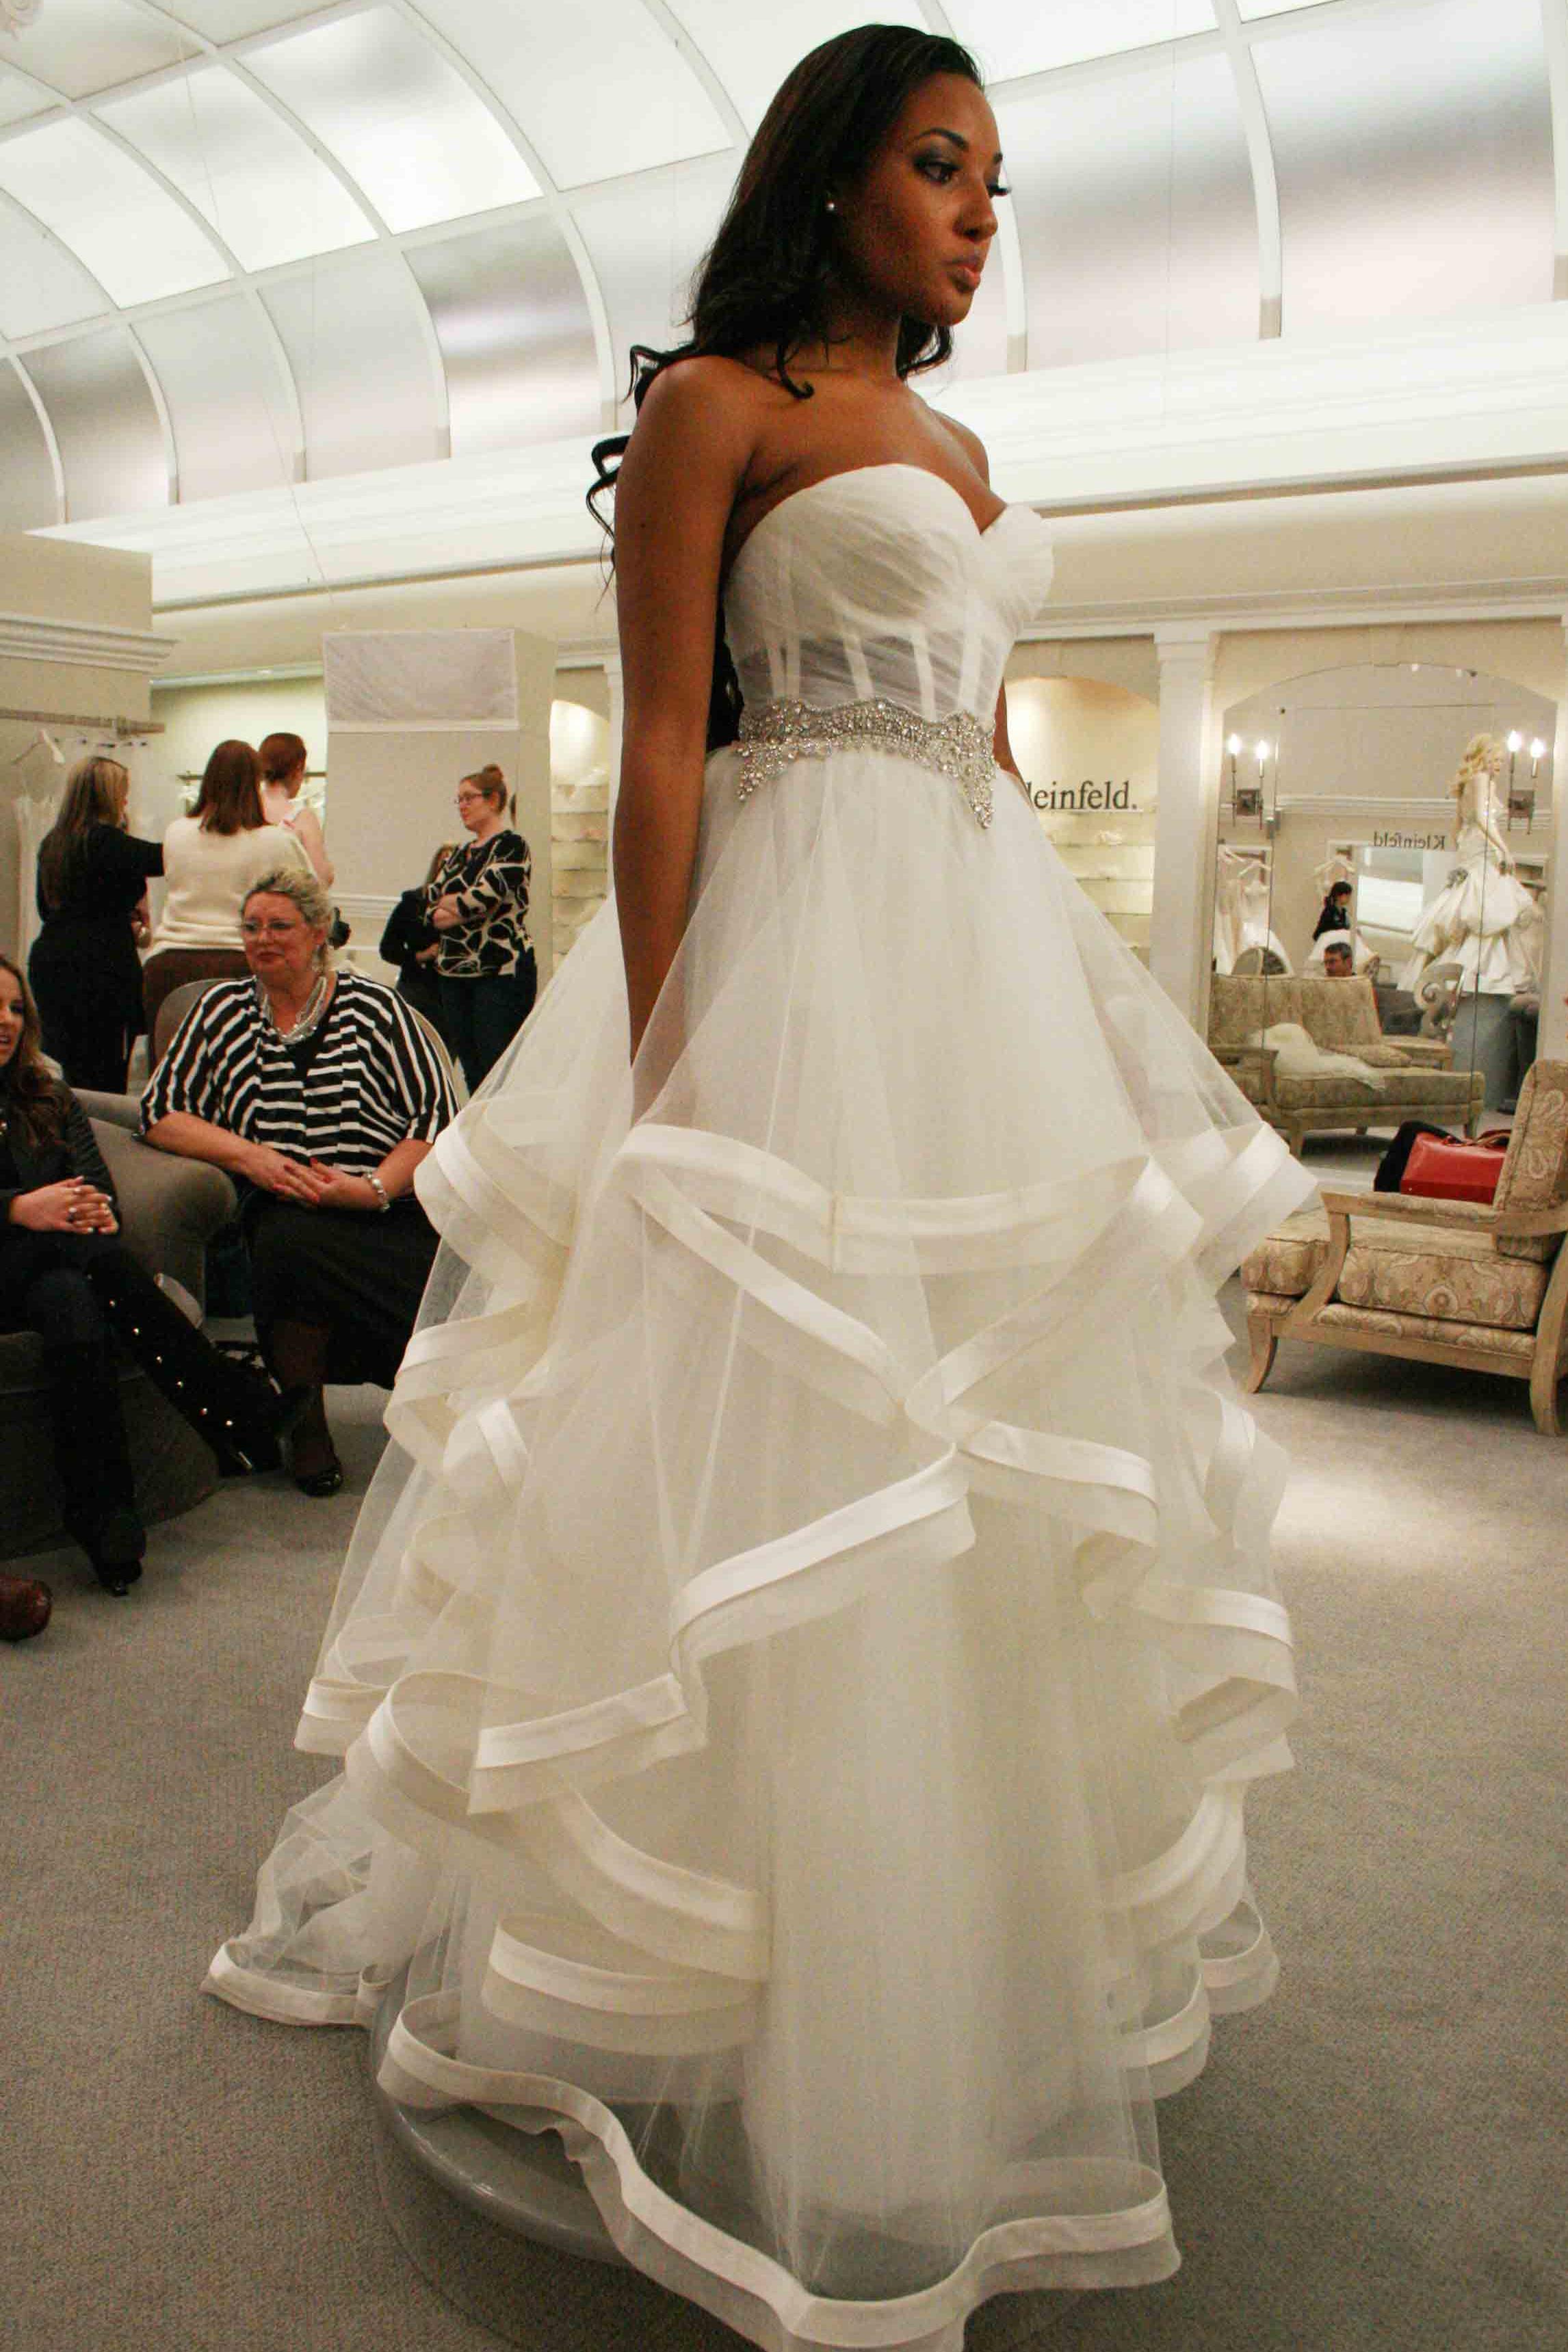 Season 11 Featured Wedding Dresses Part 6 Say Yes to the Dress TLC